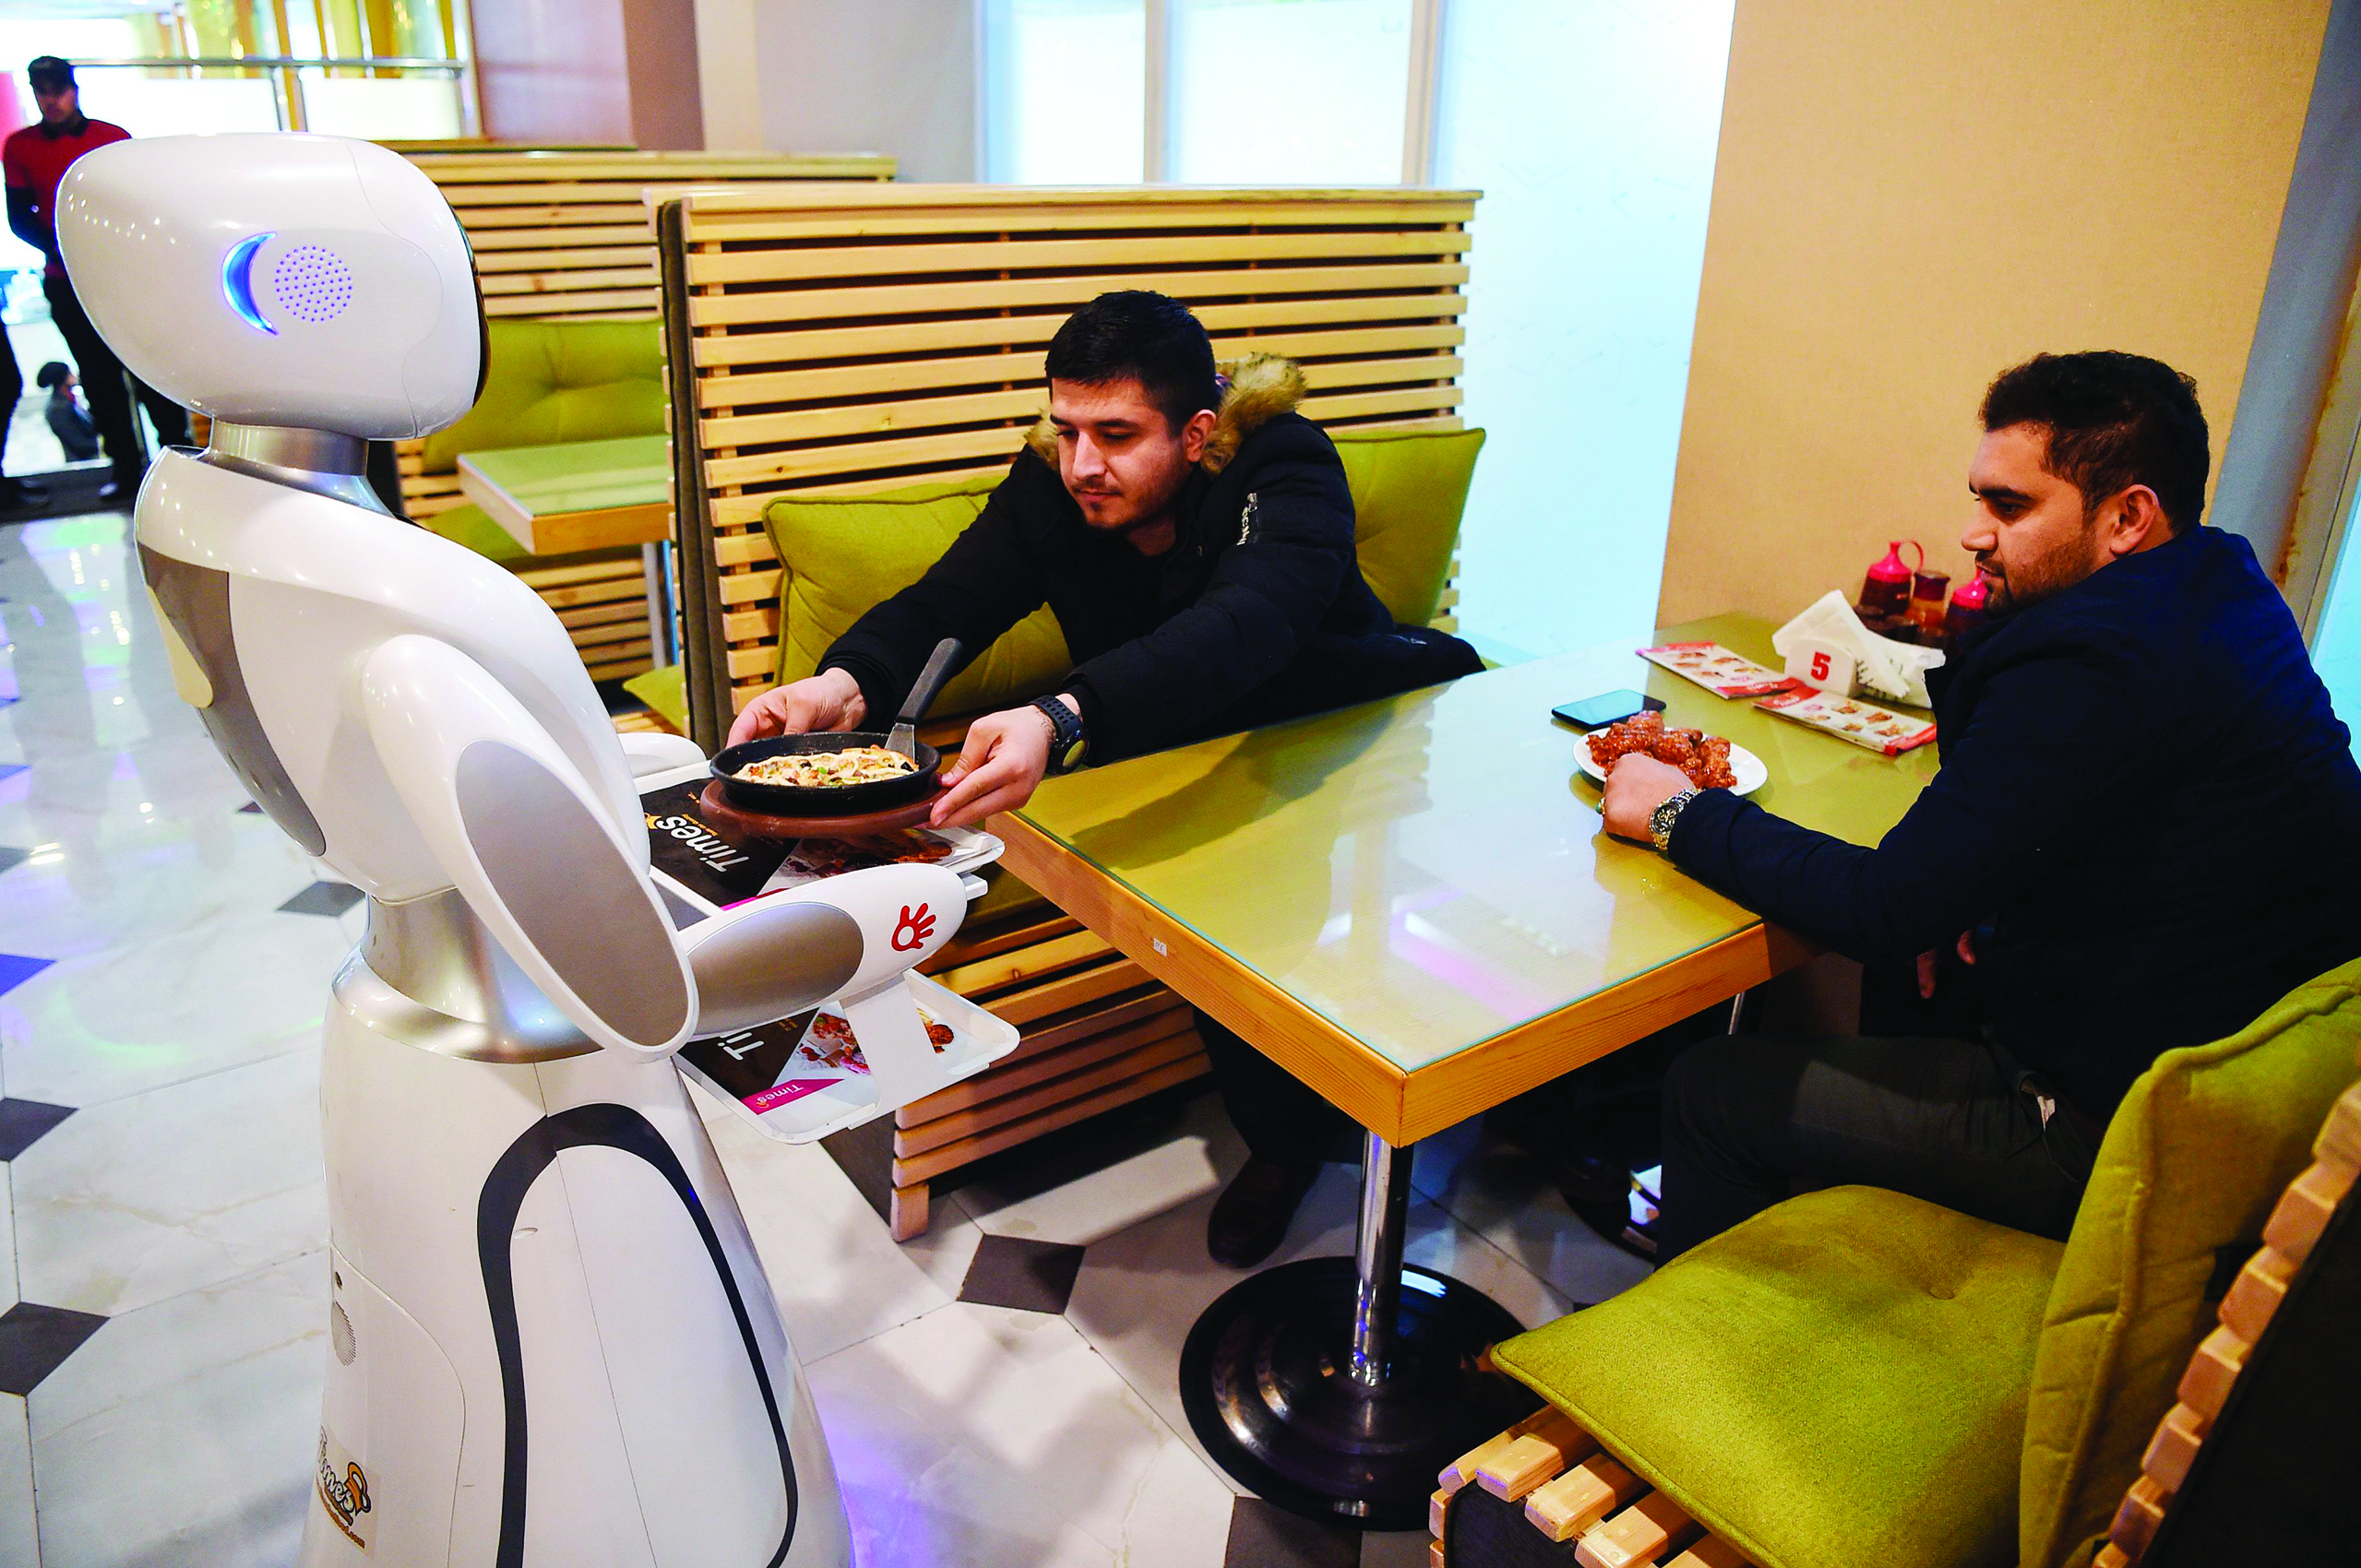 A waitress robot, named Timea, delivers food to customers at a fast food restaurant in Kabul on February 13, 2020. (Photo by WAKIL KOHSAR / AFP)